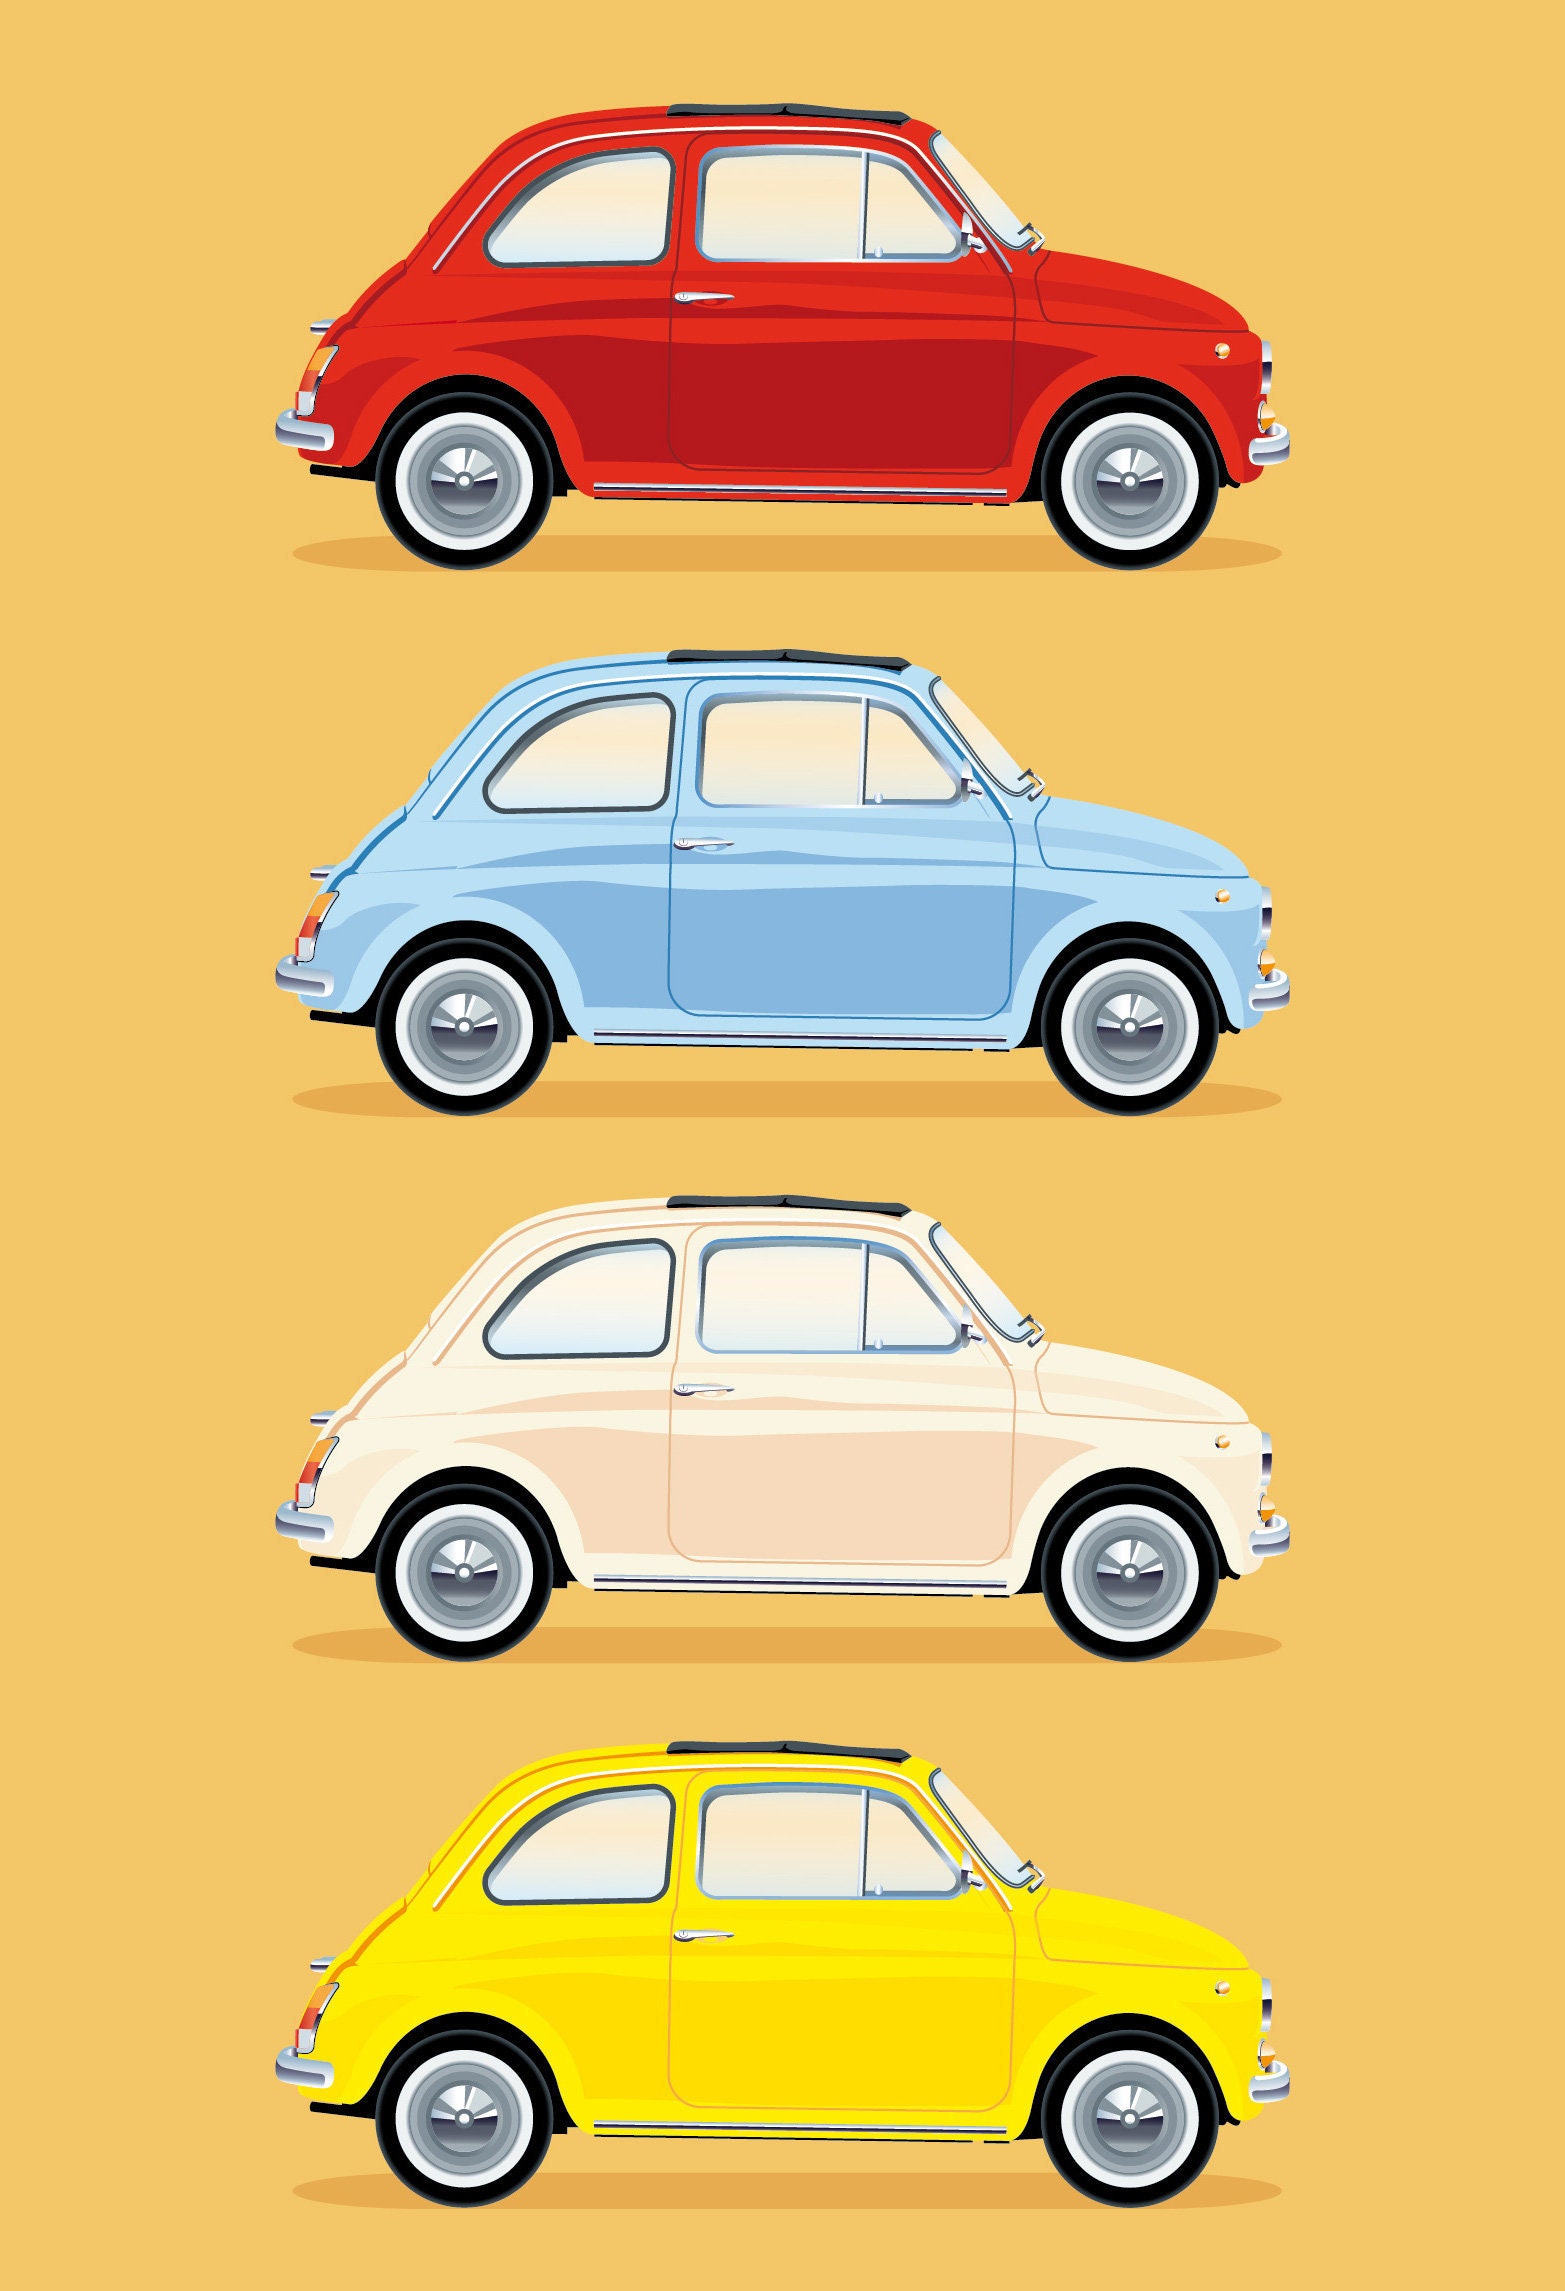 Poster Gift A3 A4 A2 Print 4  Mini Cooper Classic Iconic Car Illustration Art Profile Sideview Poster Souvenir